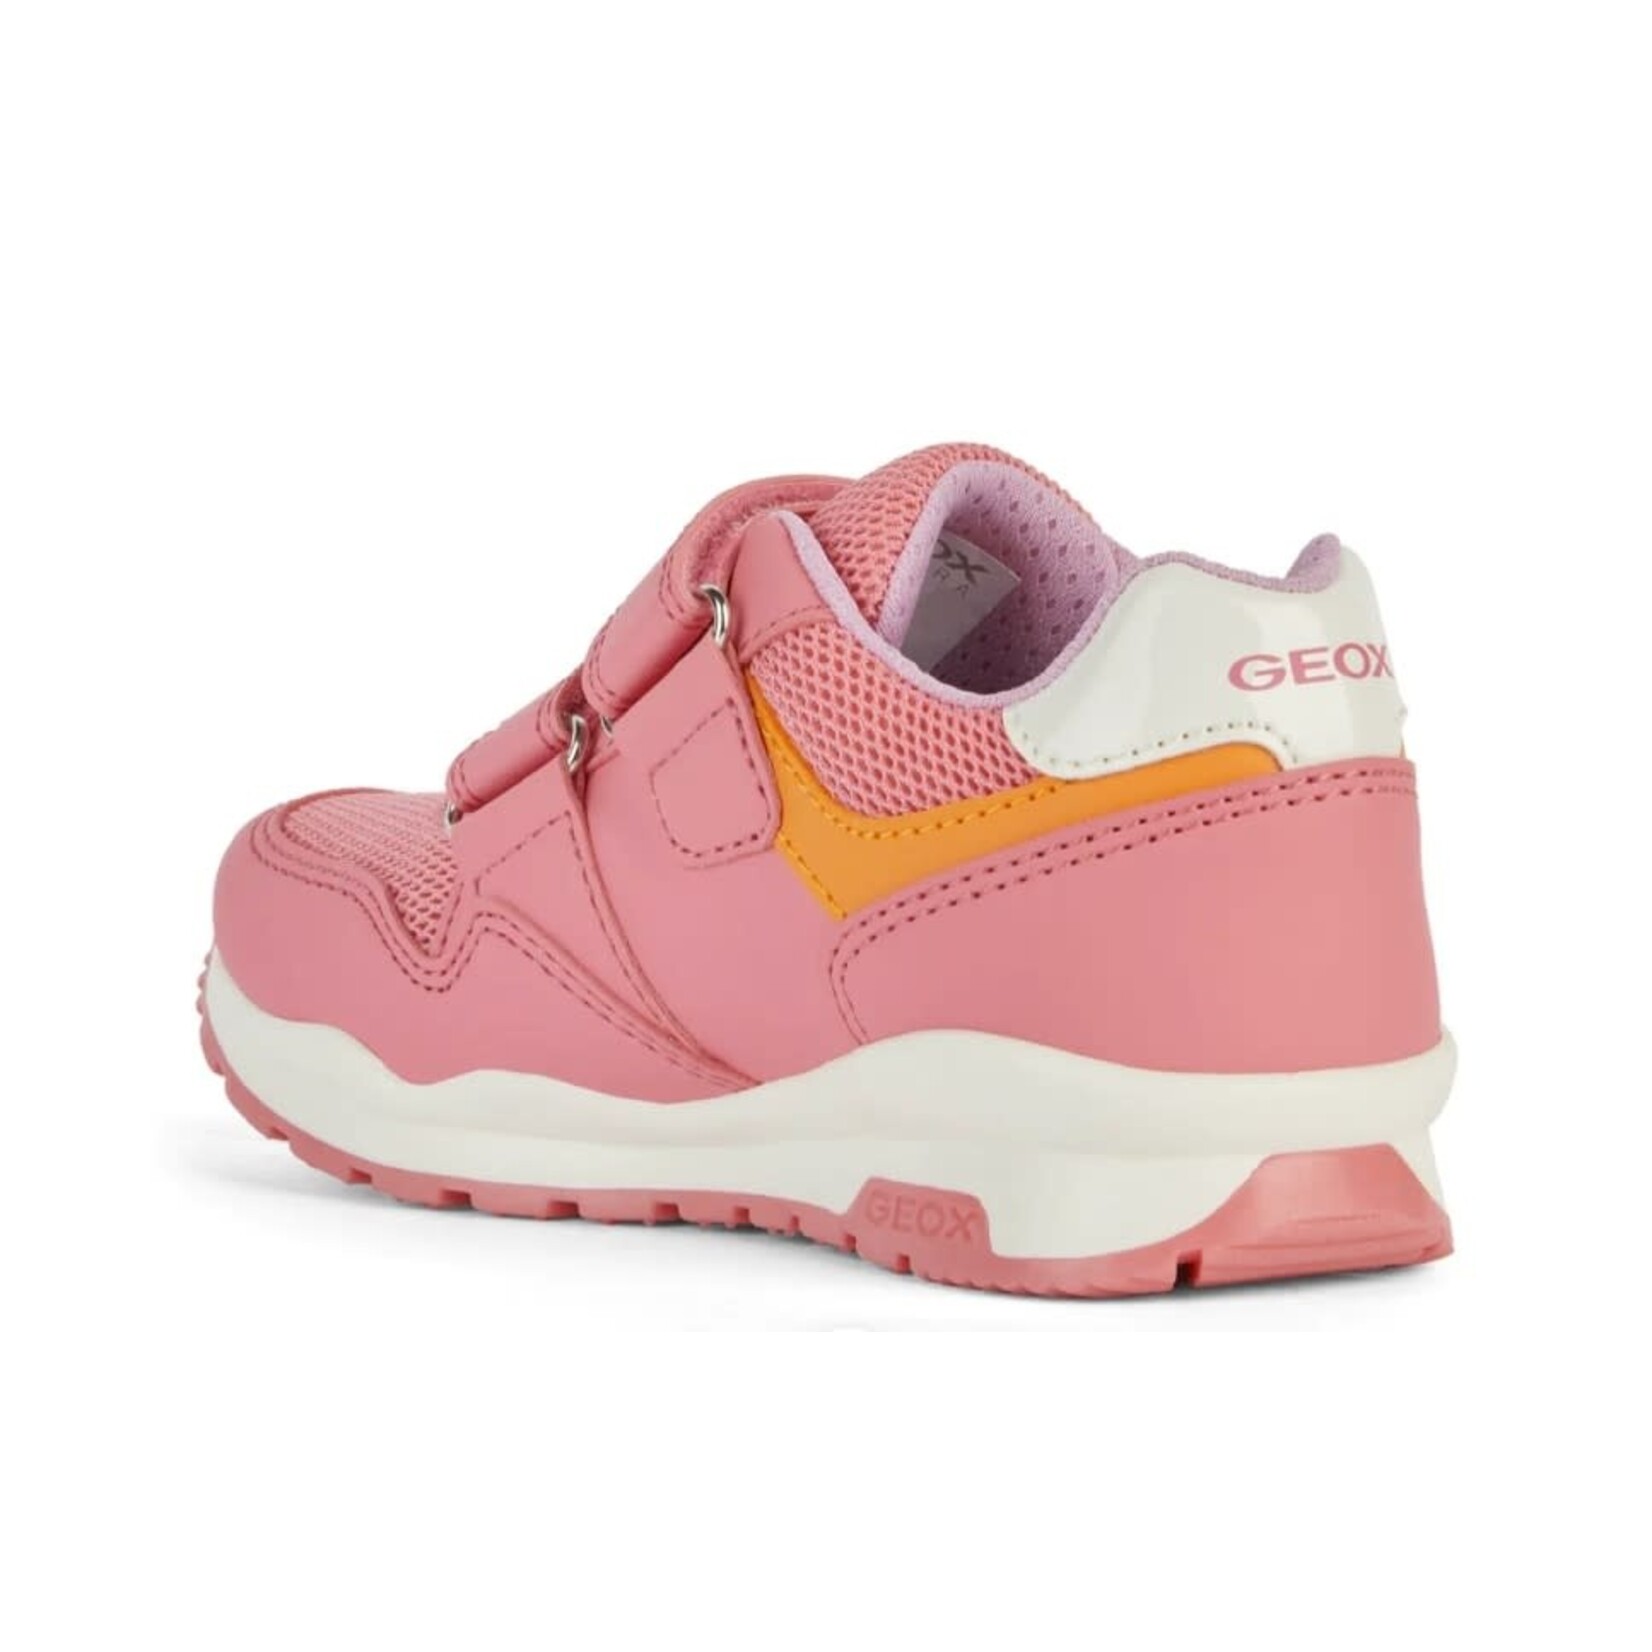 Geox GEOX - Running shoes in synthetic leather and mesh  'Pavel - Light coral/Light pink'